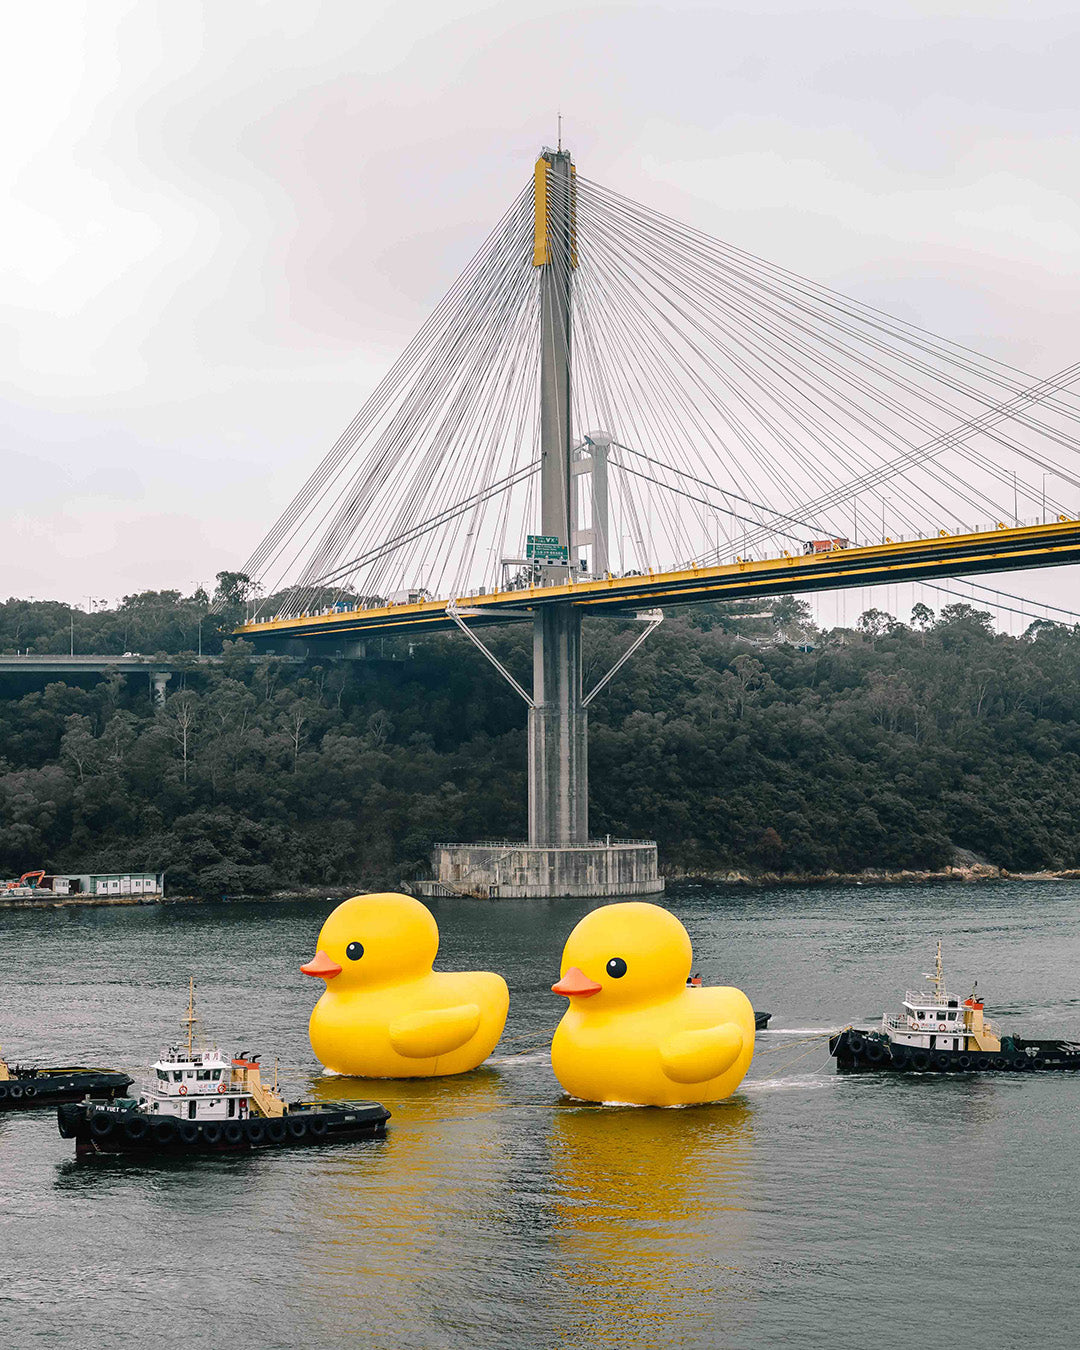 A Decade Later, The Giant Inflatable Rubber Duck Graces the City Once